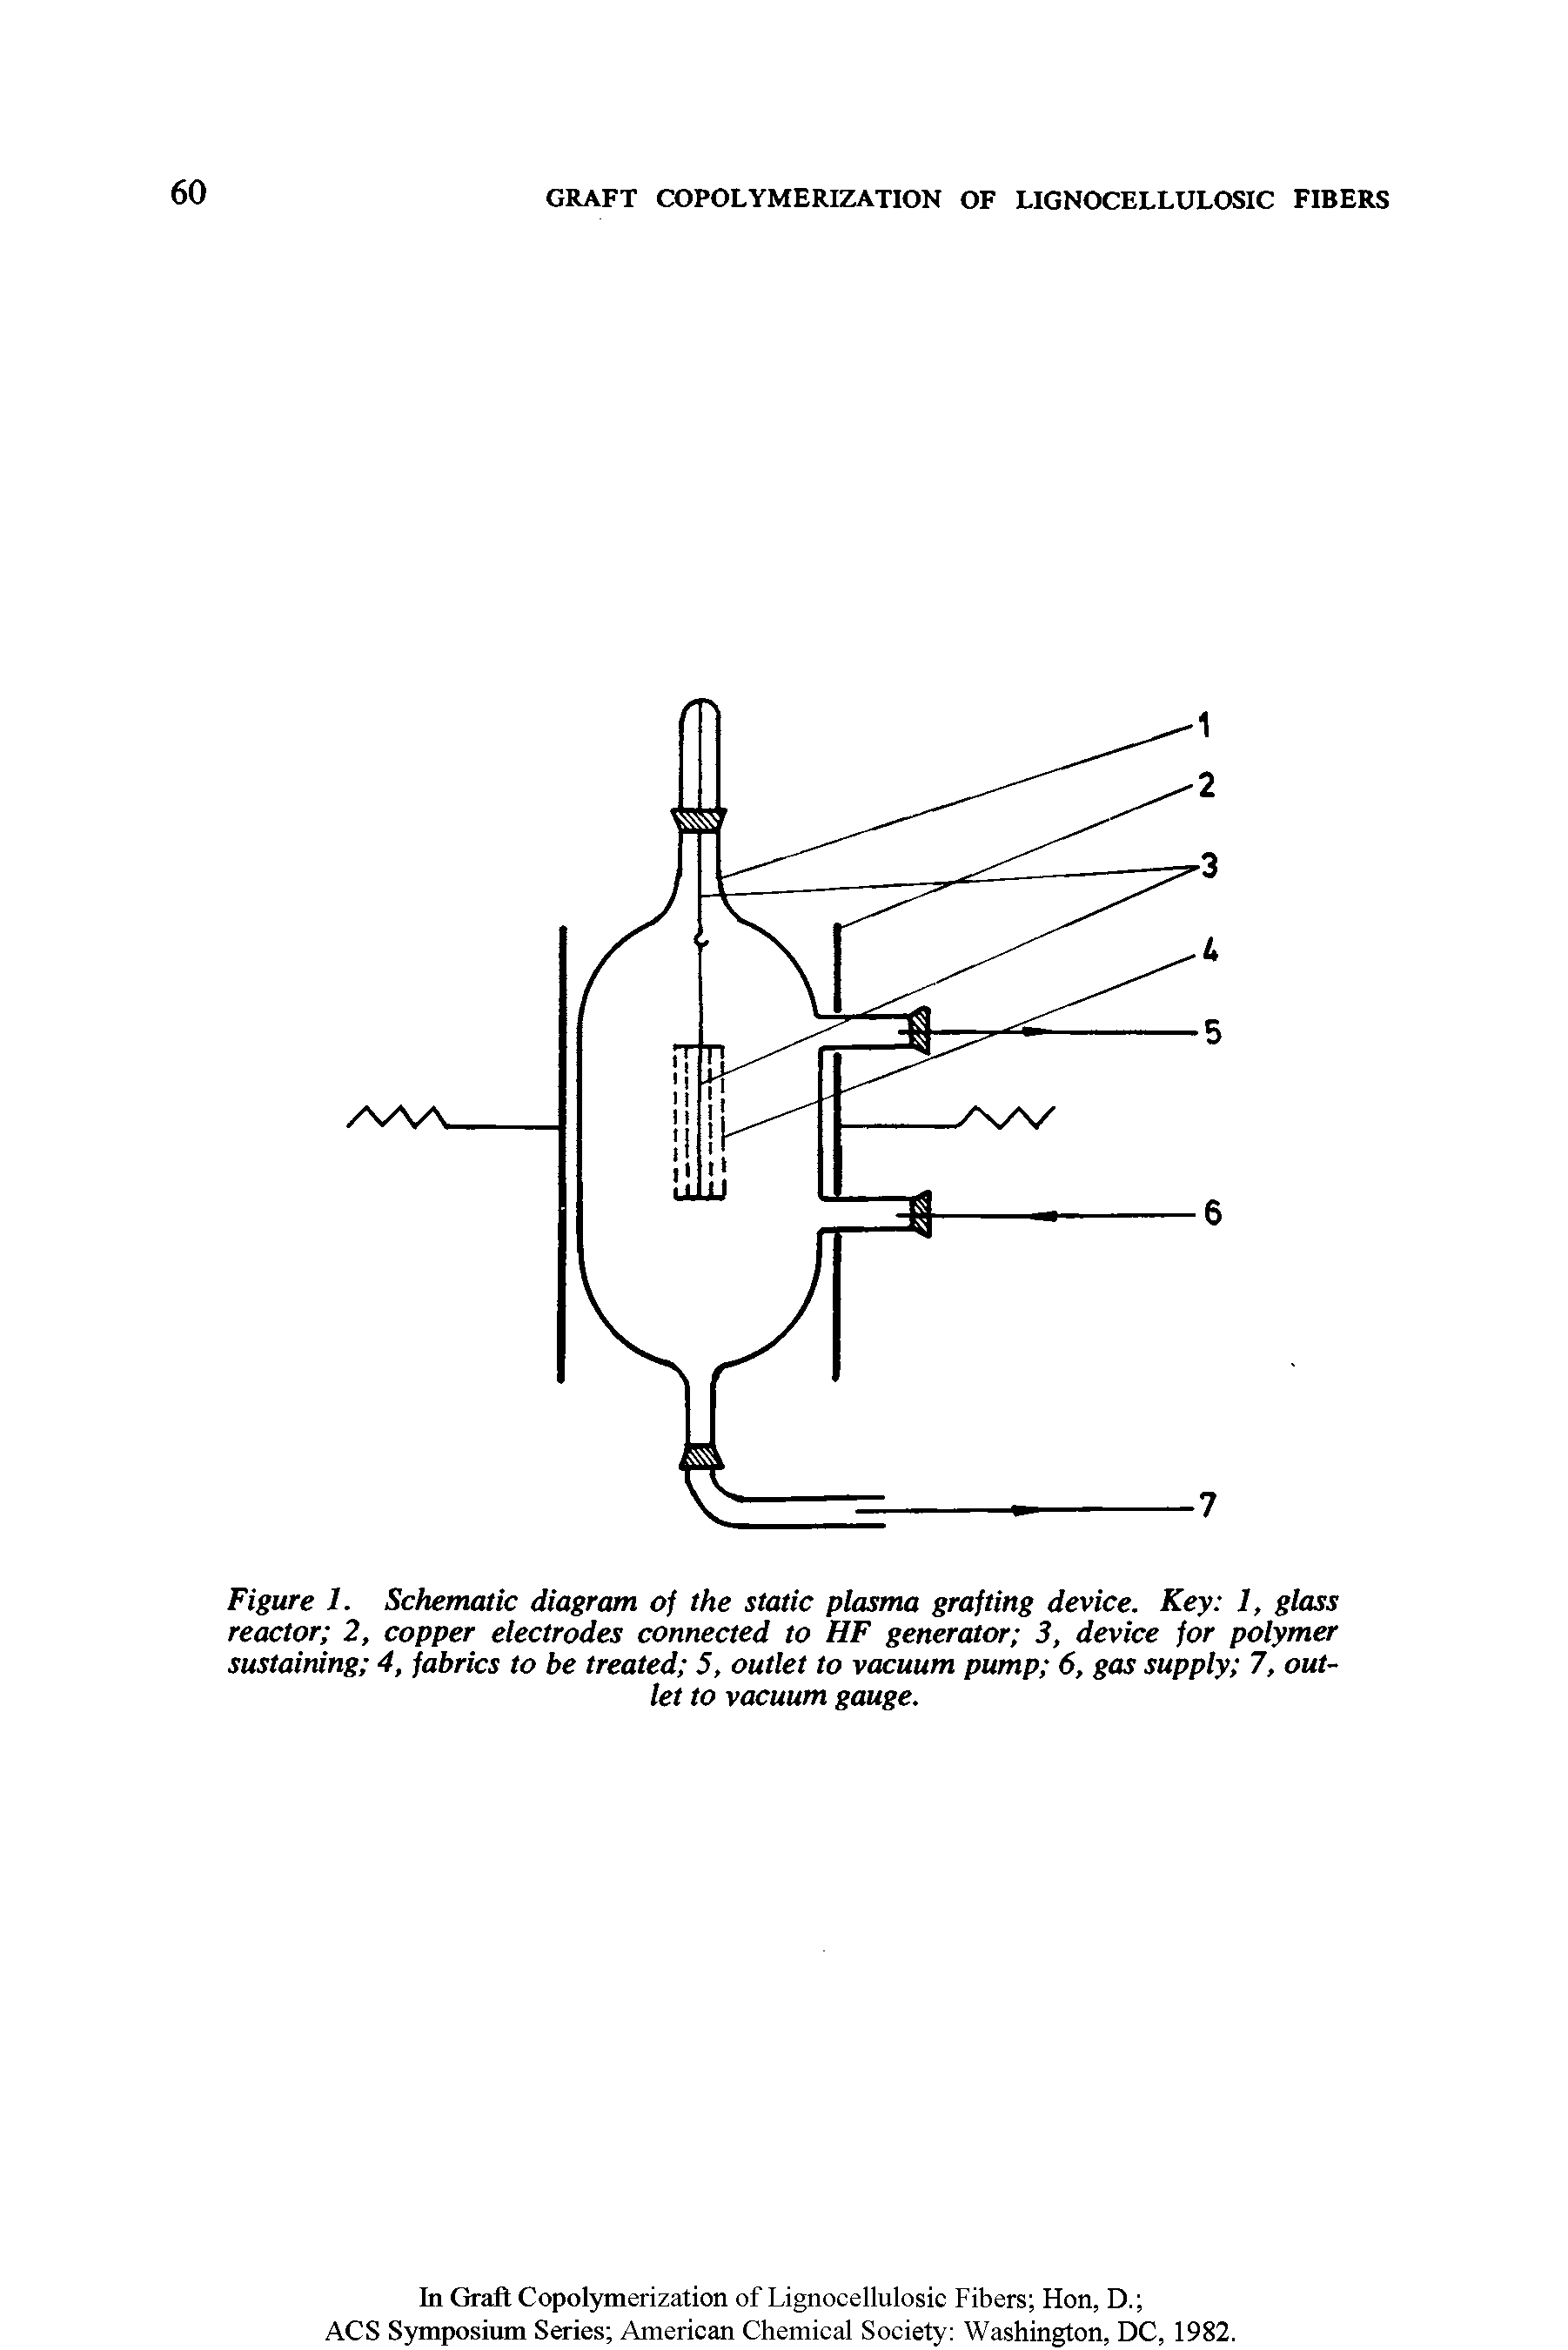 Figure 1. Schematic diagram of the static plasma grafting device. Key 1, glass reactor 2, copper electrodes connected to HF generator 3, device for polymer sustaining 4, fabrics to be treated 5, outlet to vacuum pump 6, gas supply 7, outlet to vacuum gauge.